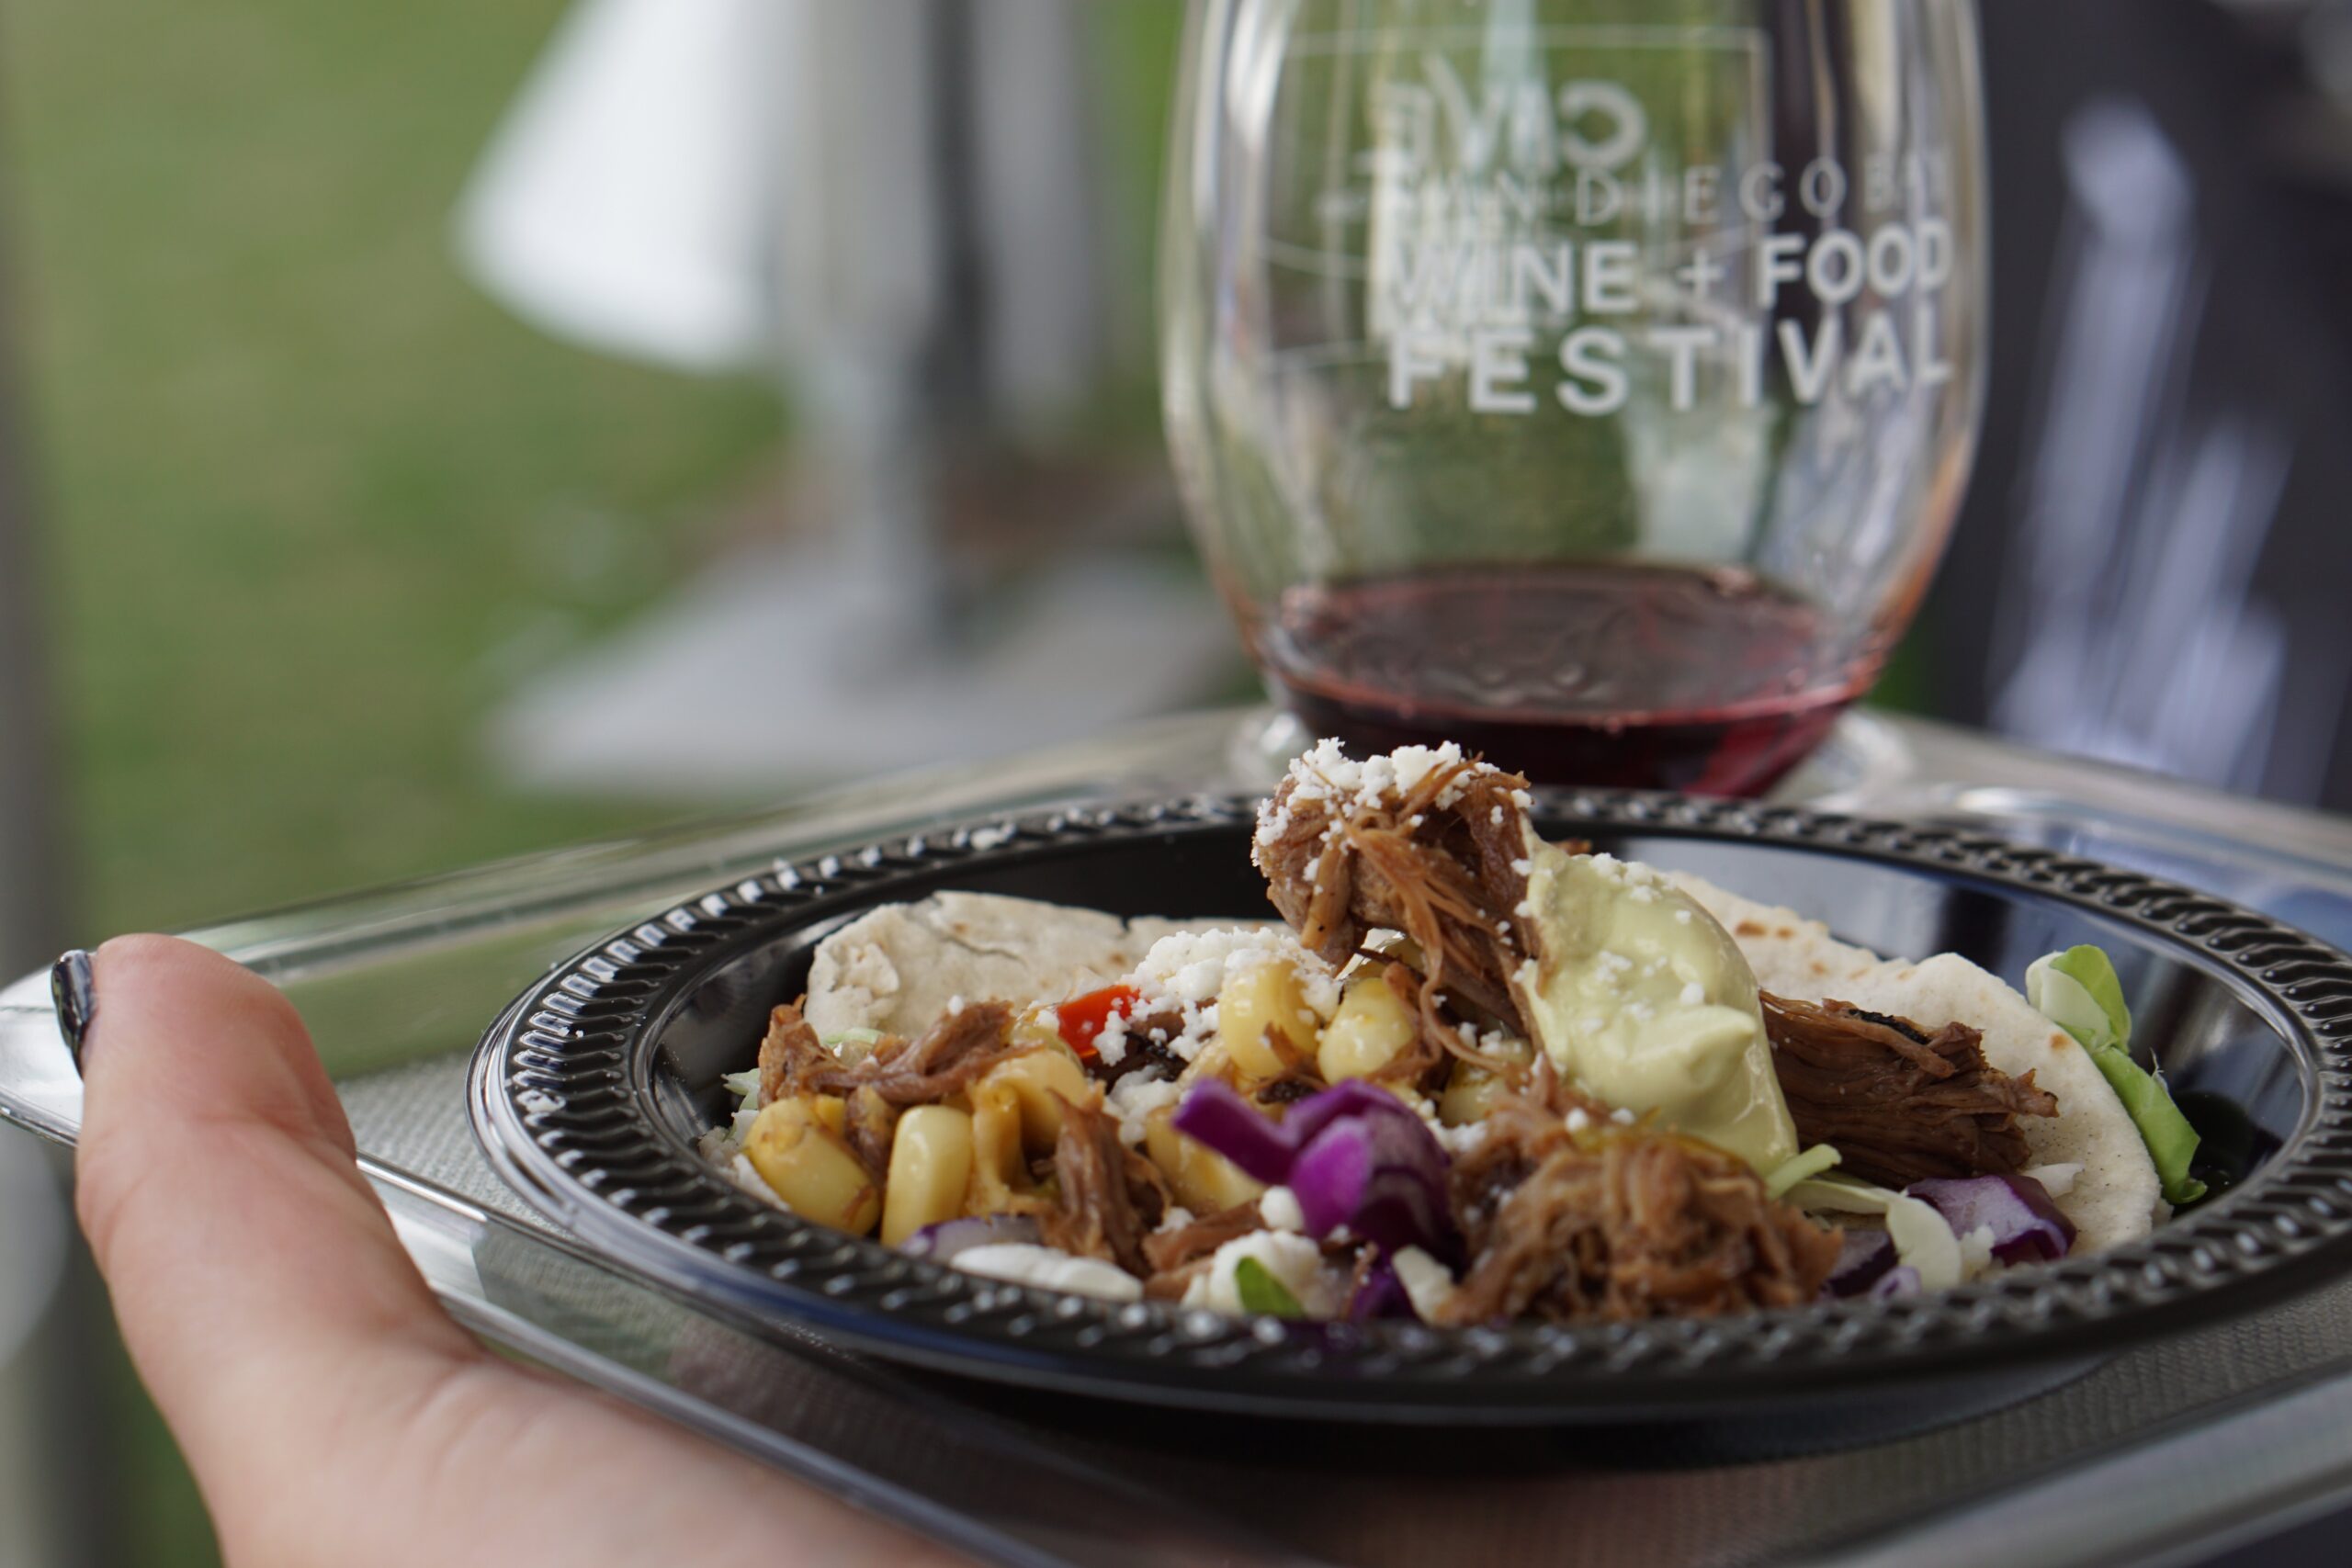 San Diego Wine and Food Festival 2021 Returns & Here’s Everything You Need to Know!